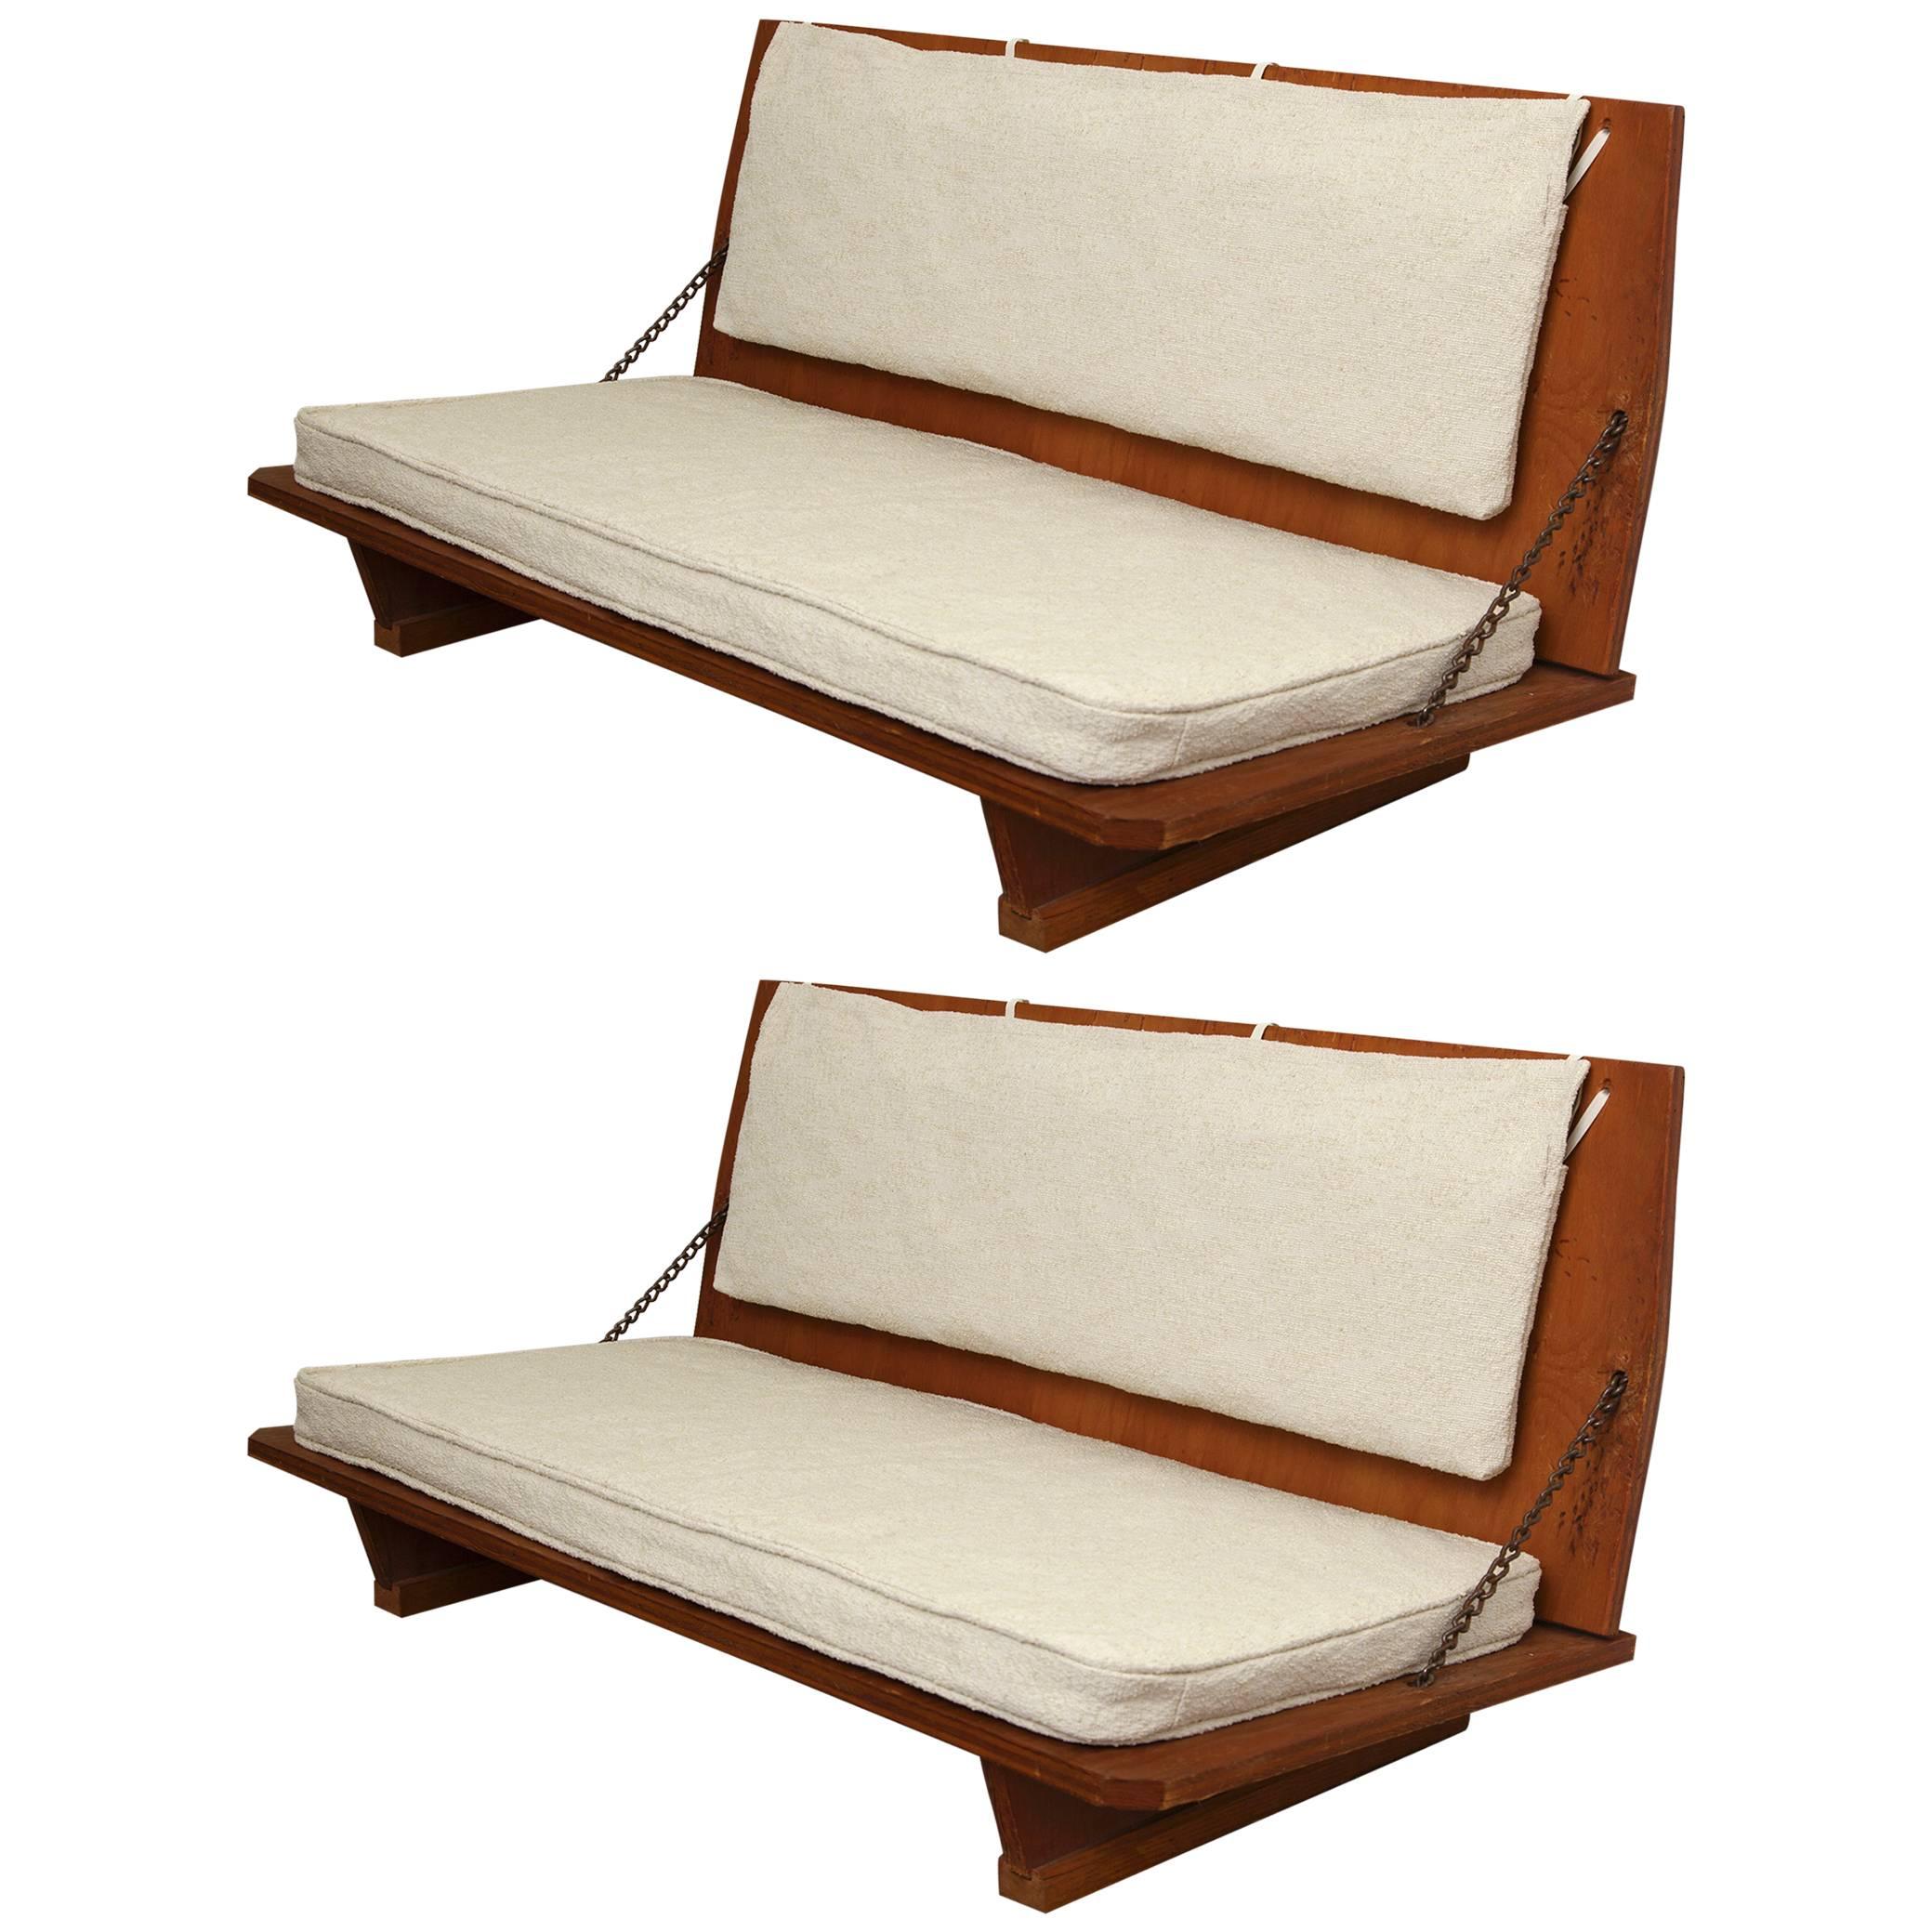 Pair of "Unitarian" Benches by Frank Lloyd Wright, USA 1951 For Sale